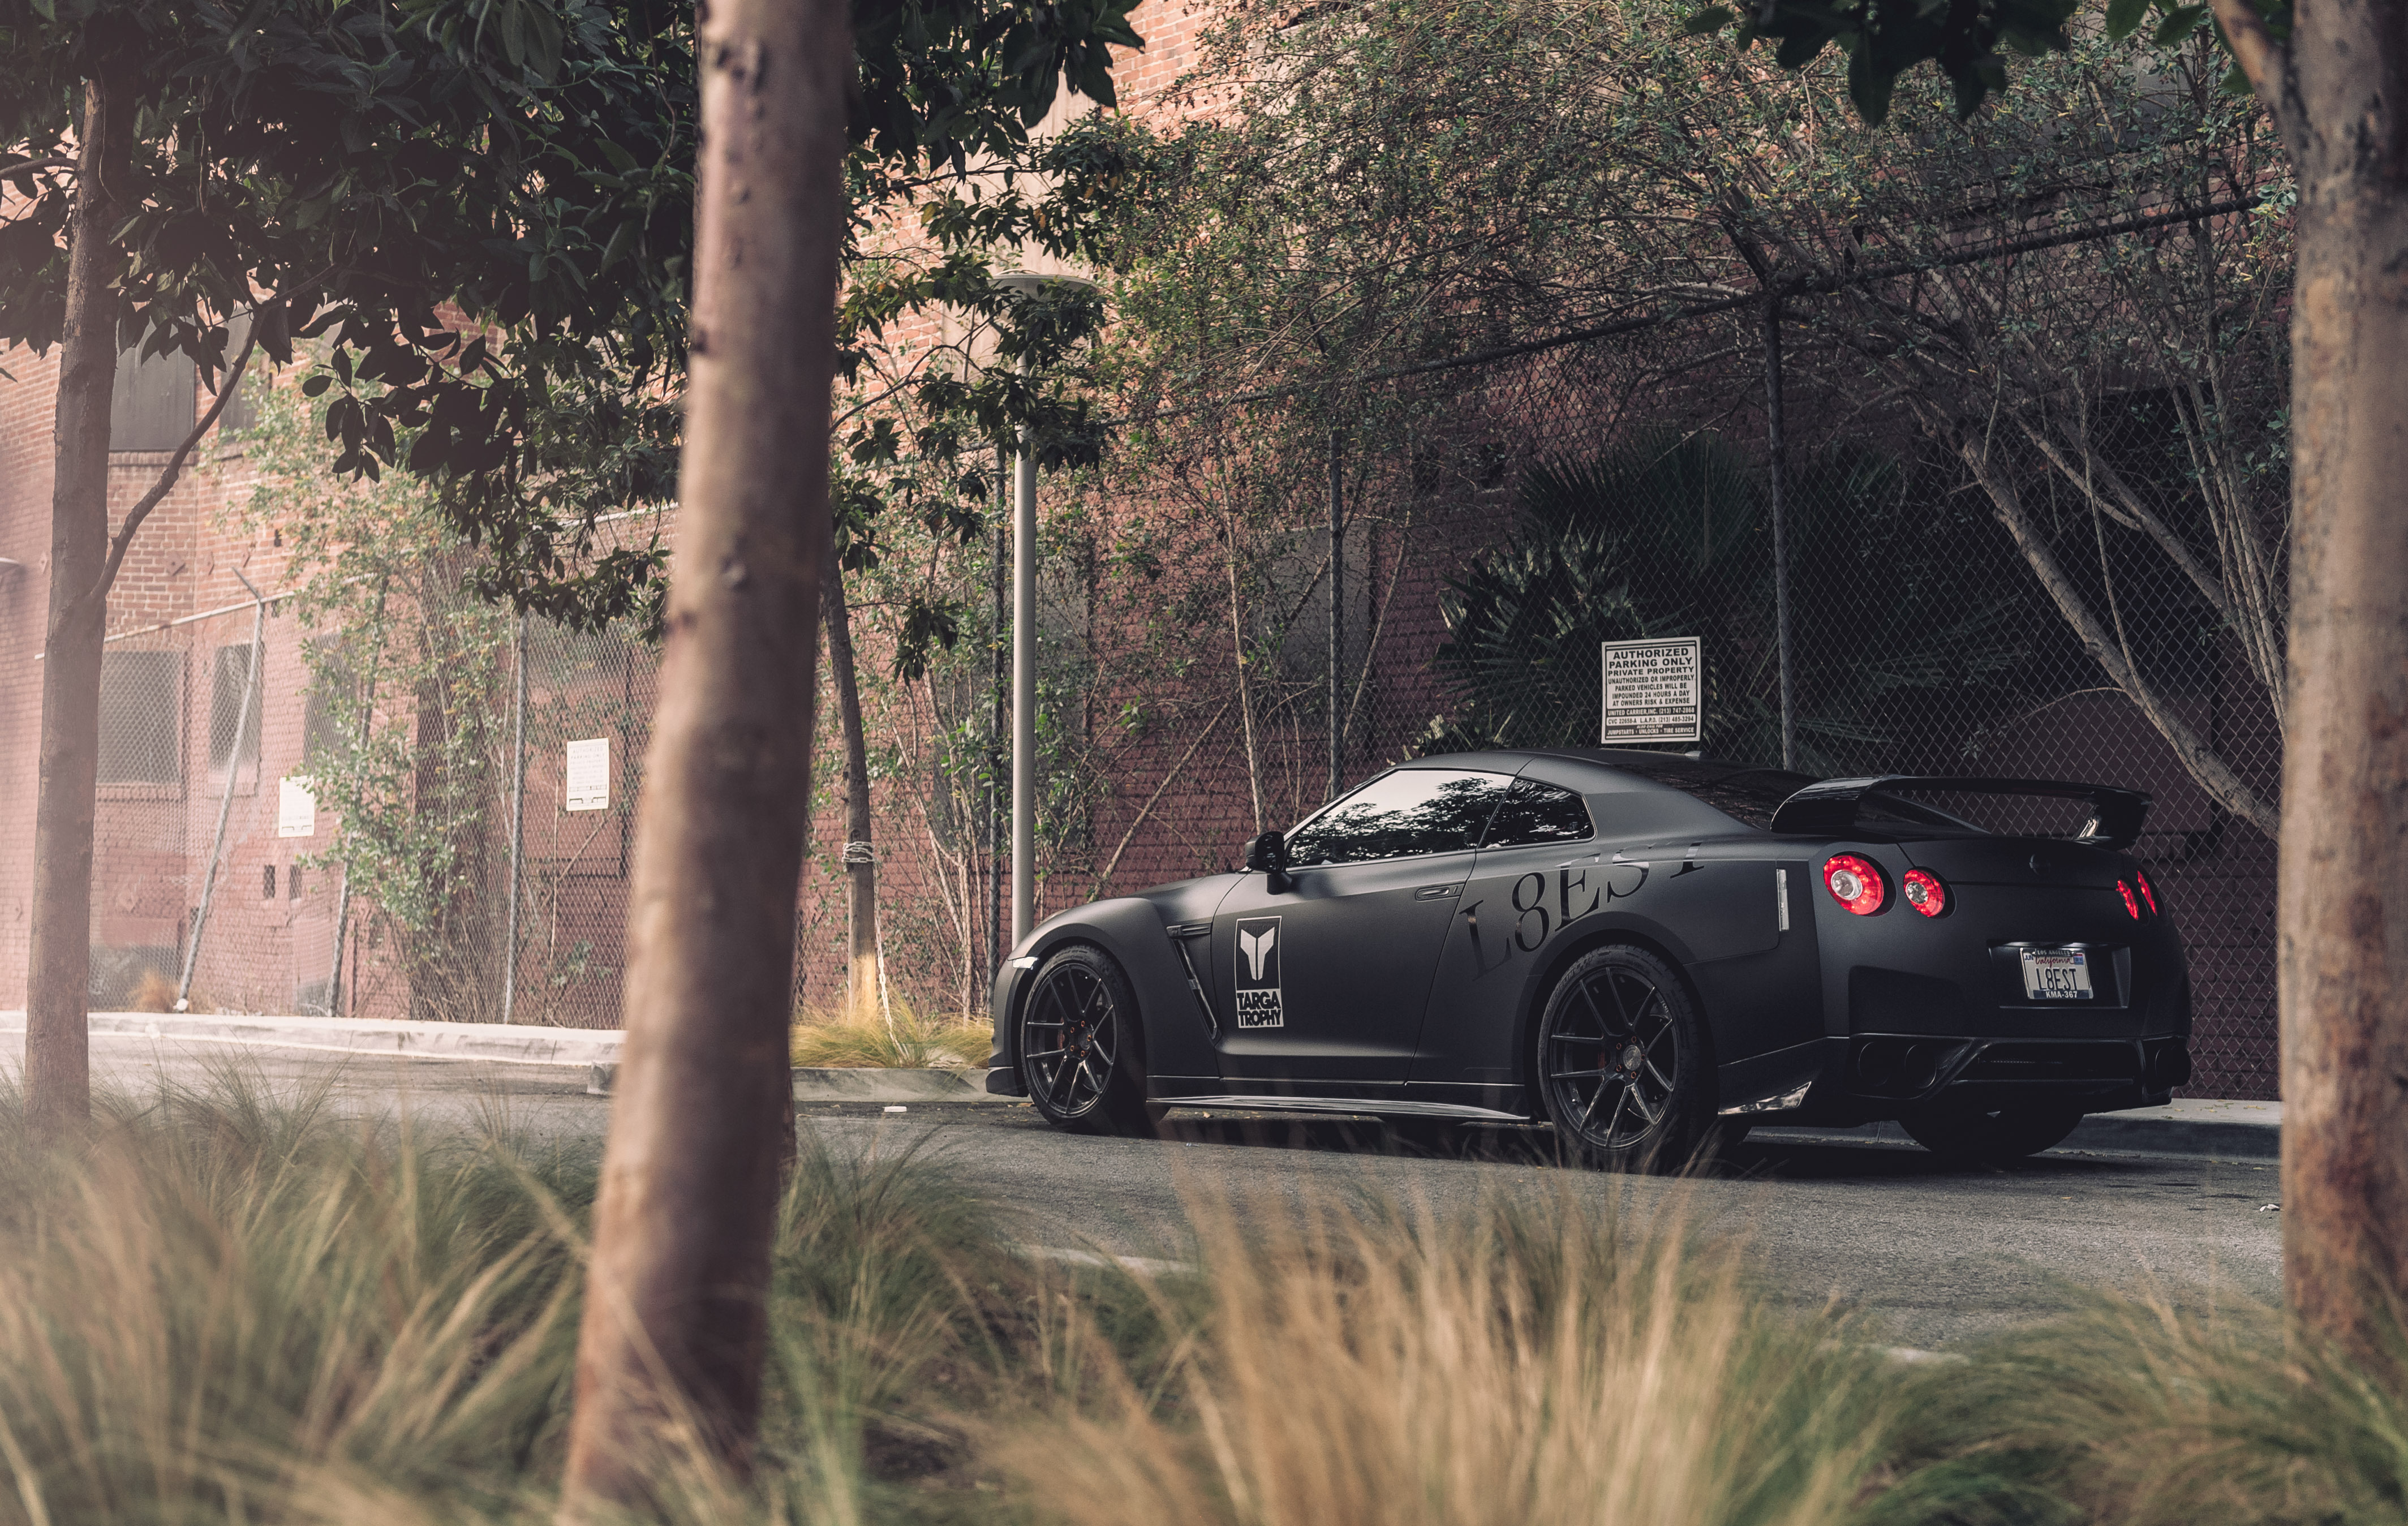 4K Nissan GT R Wallpaper And Background Image